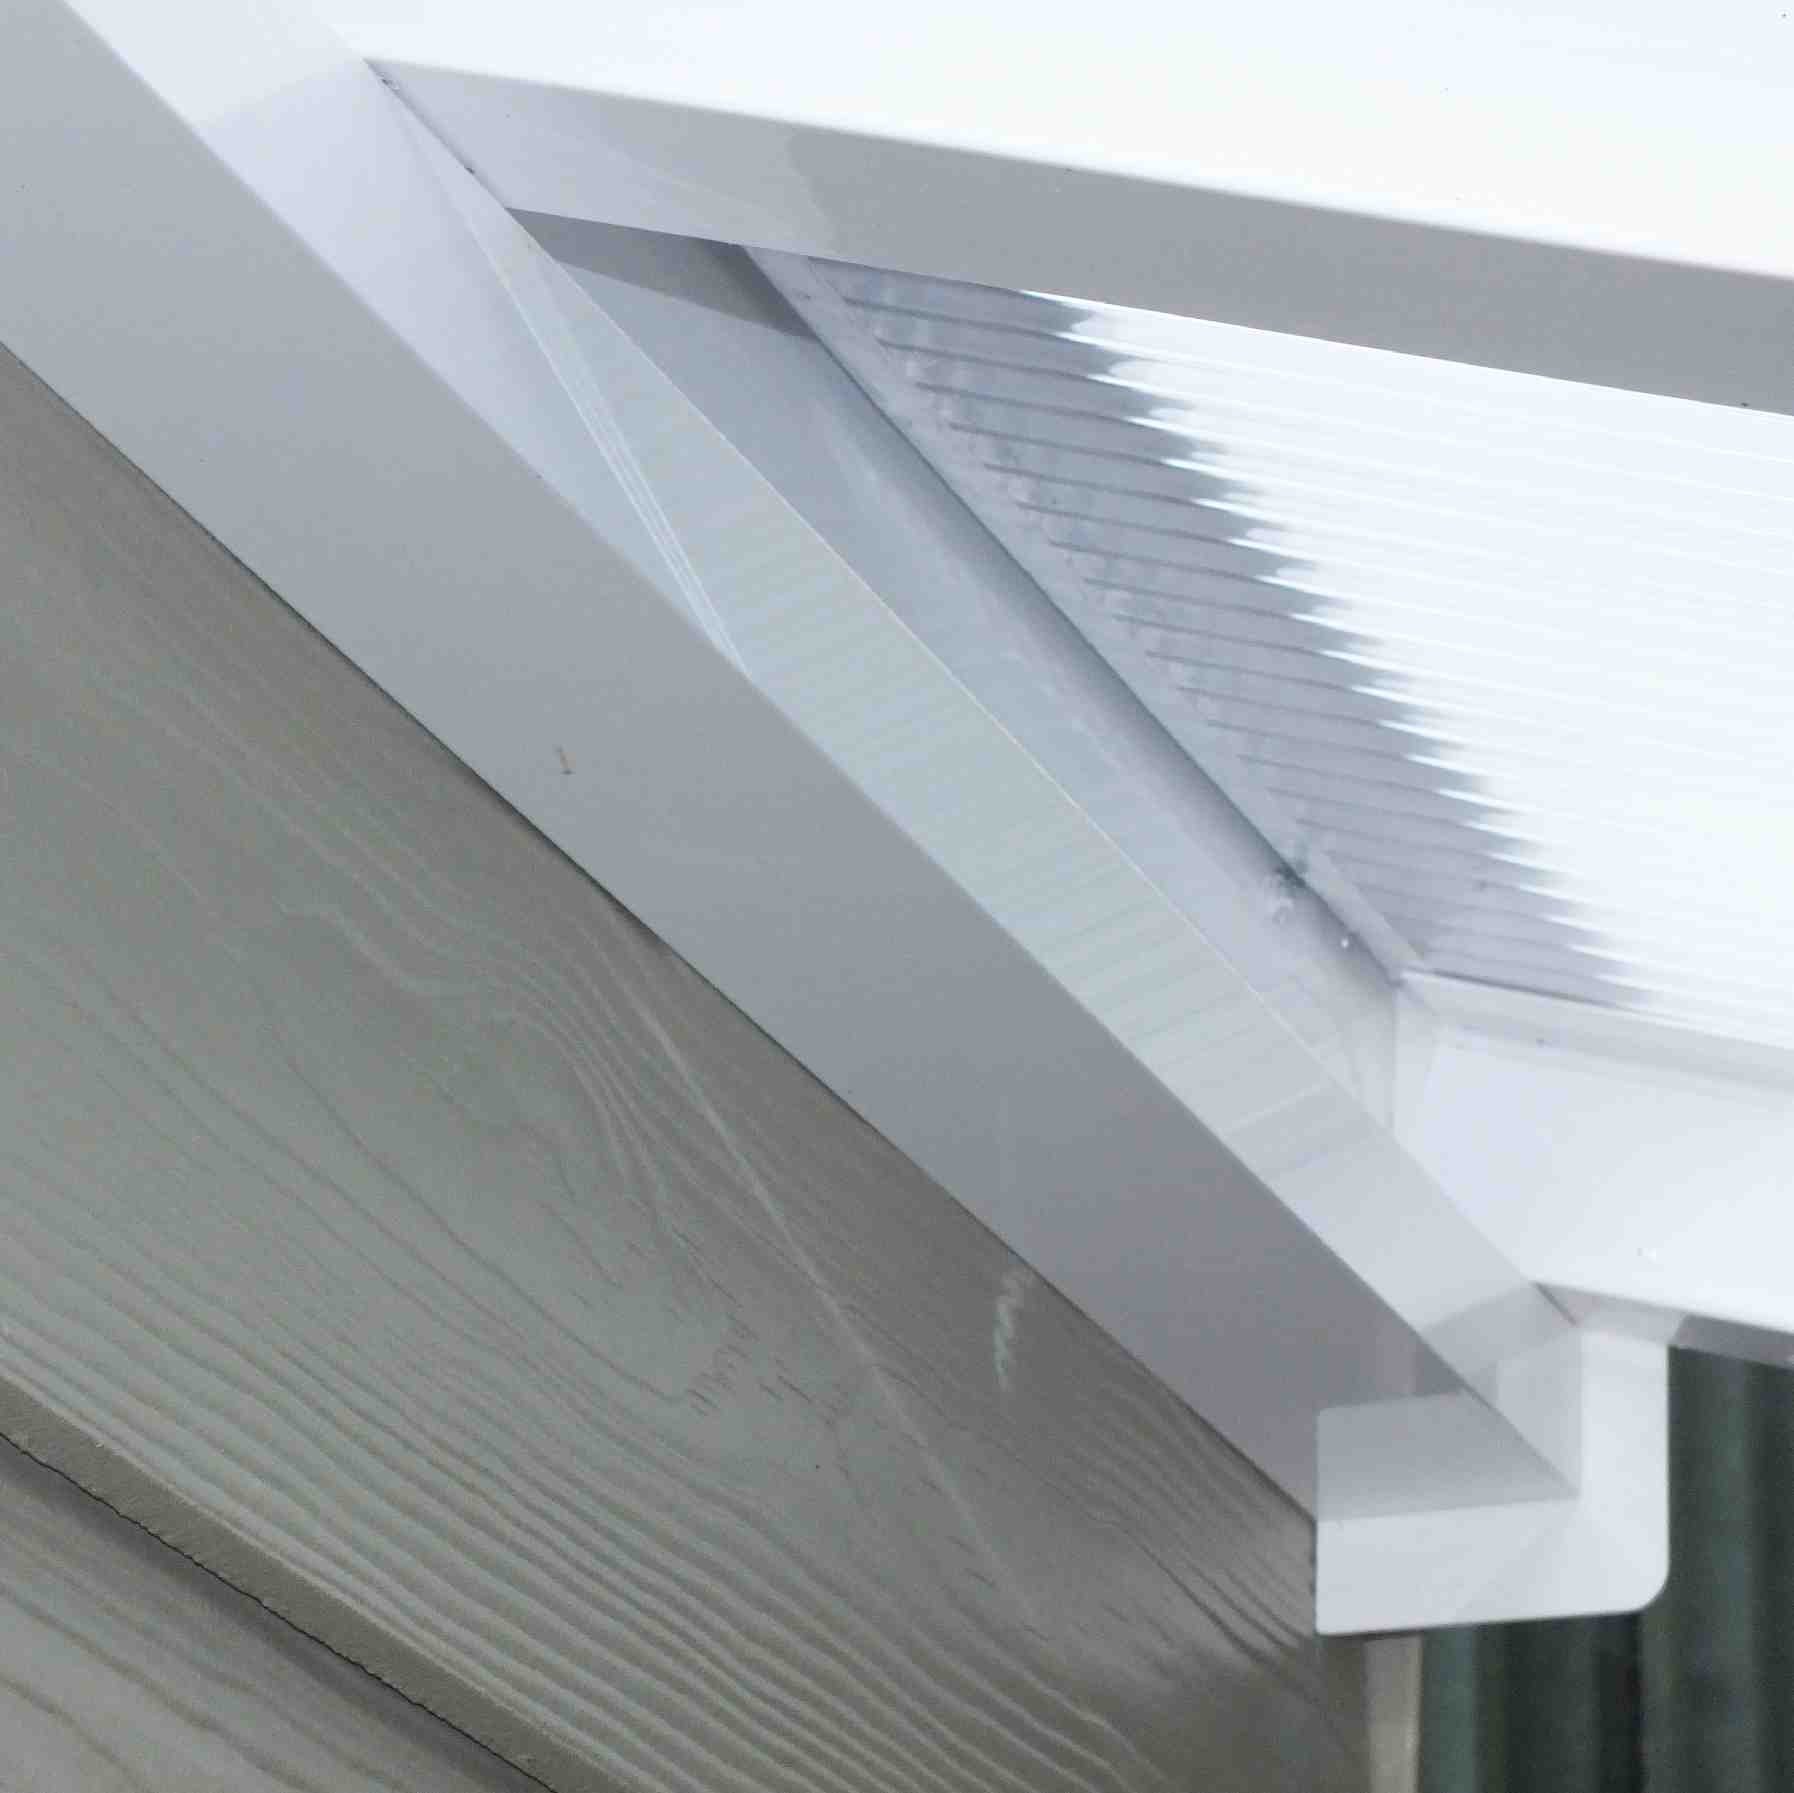 Great deals on Omega Verandah White with 16mm Polycarbonate Glazing - 11.6m (W) x 3.0m (P), (5) Supporting Posts